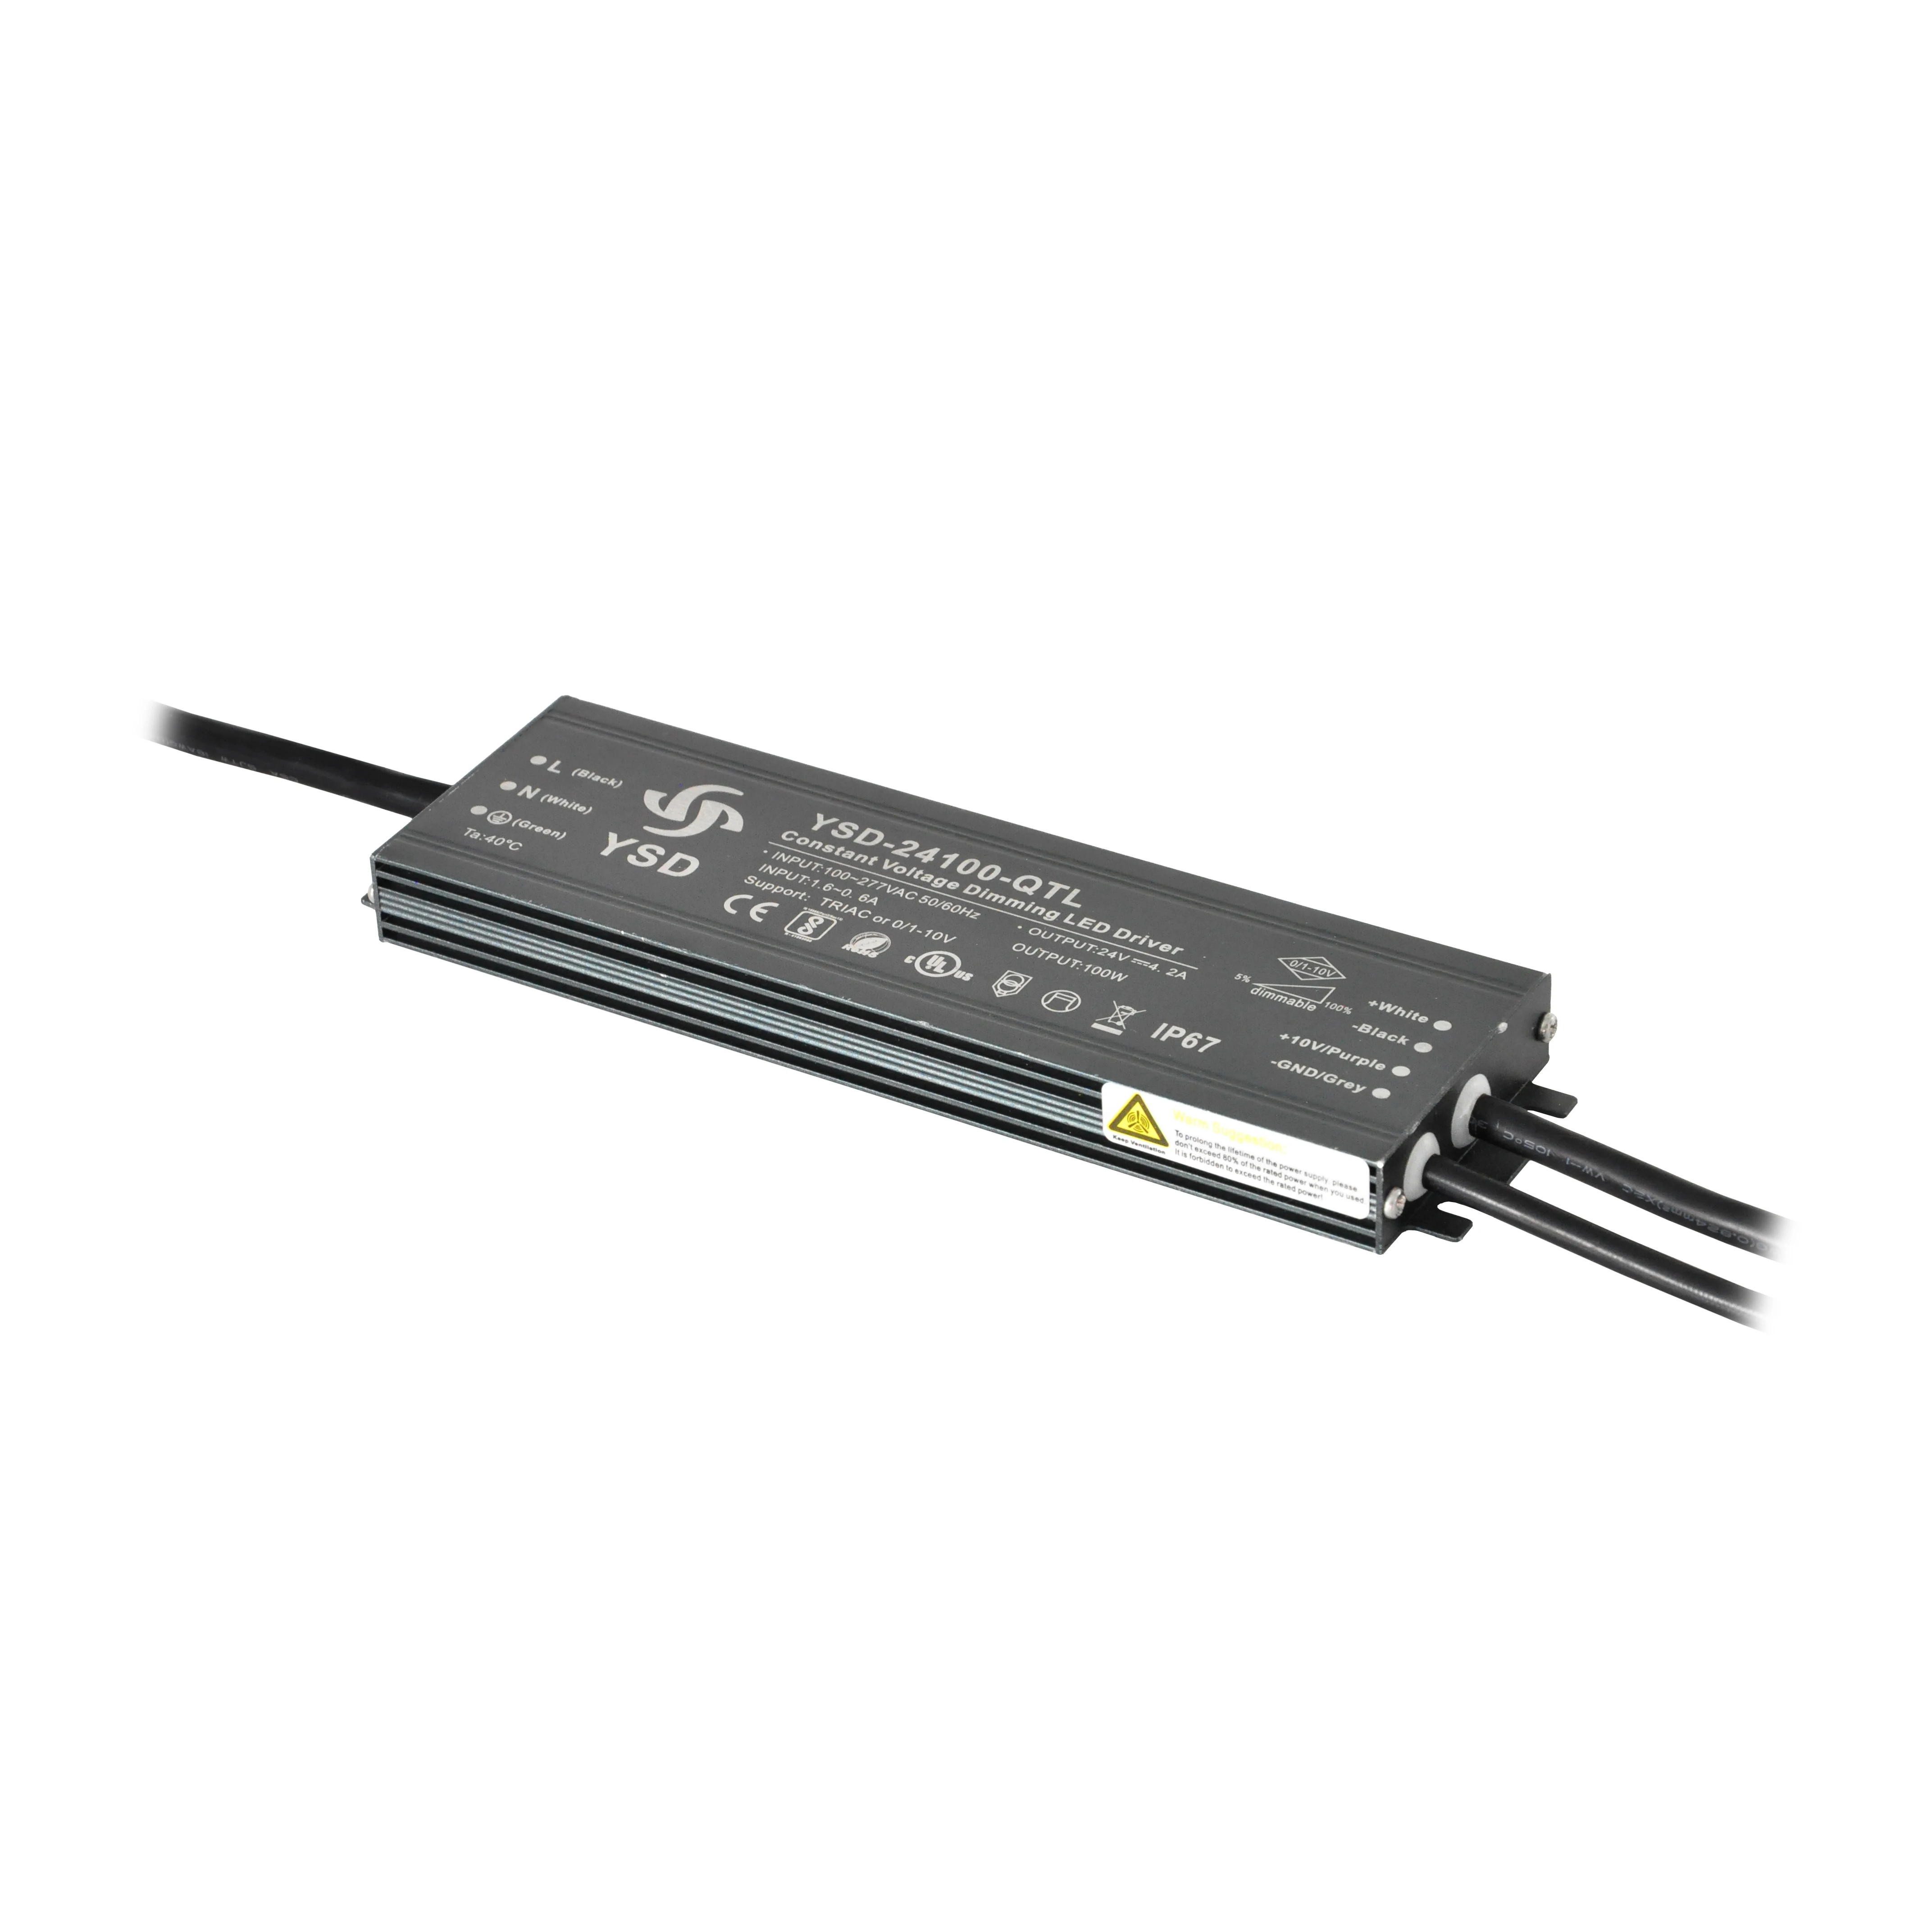 OEM constant voltage customize 24v power supply 100w ip67 LED driver ultra-thin 0-10v  triac dimmable led driver